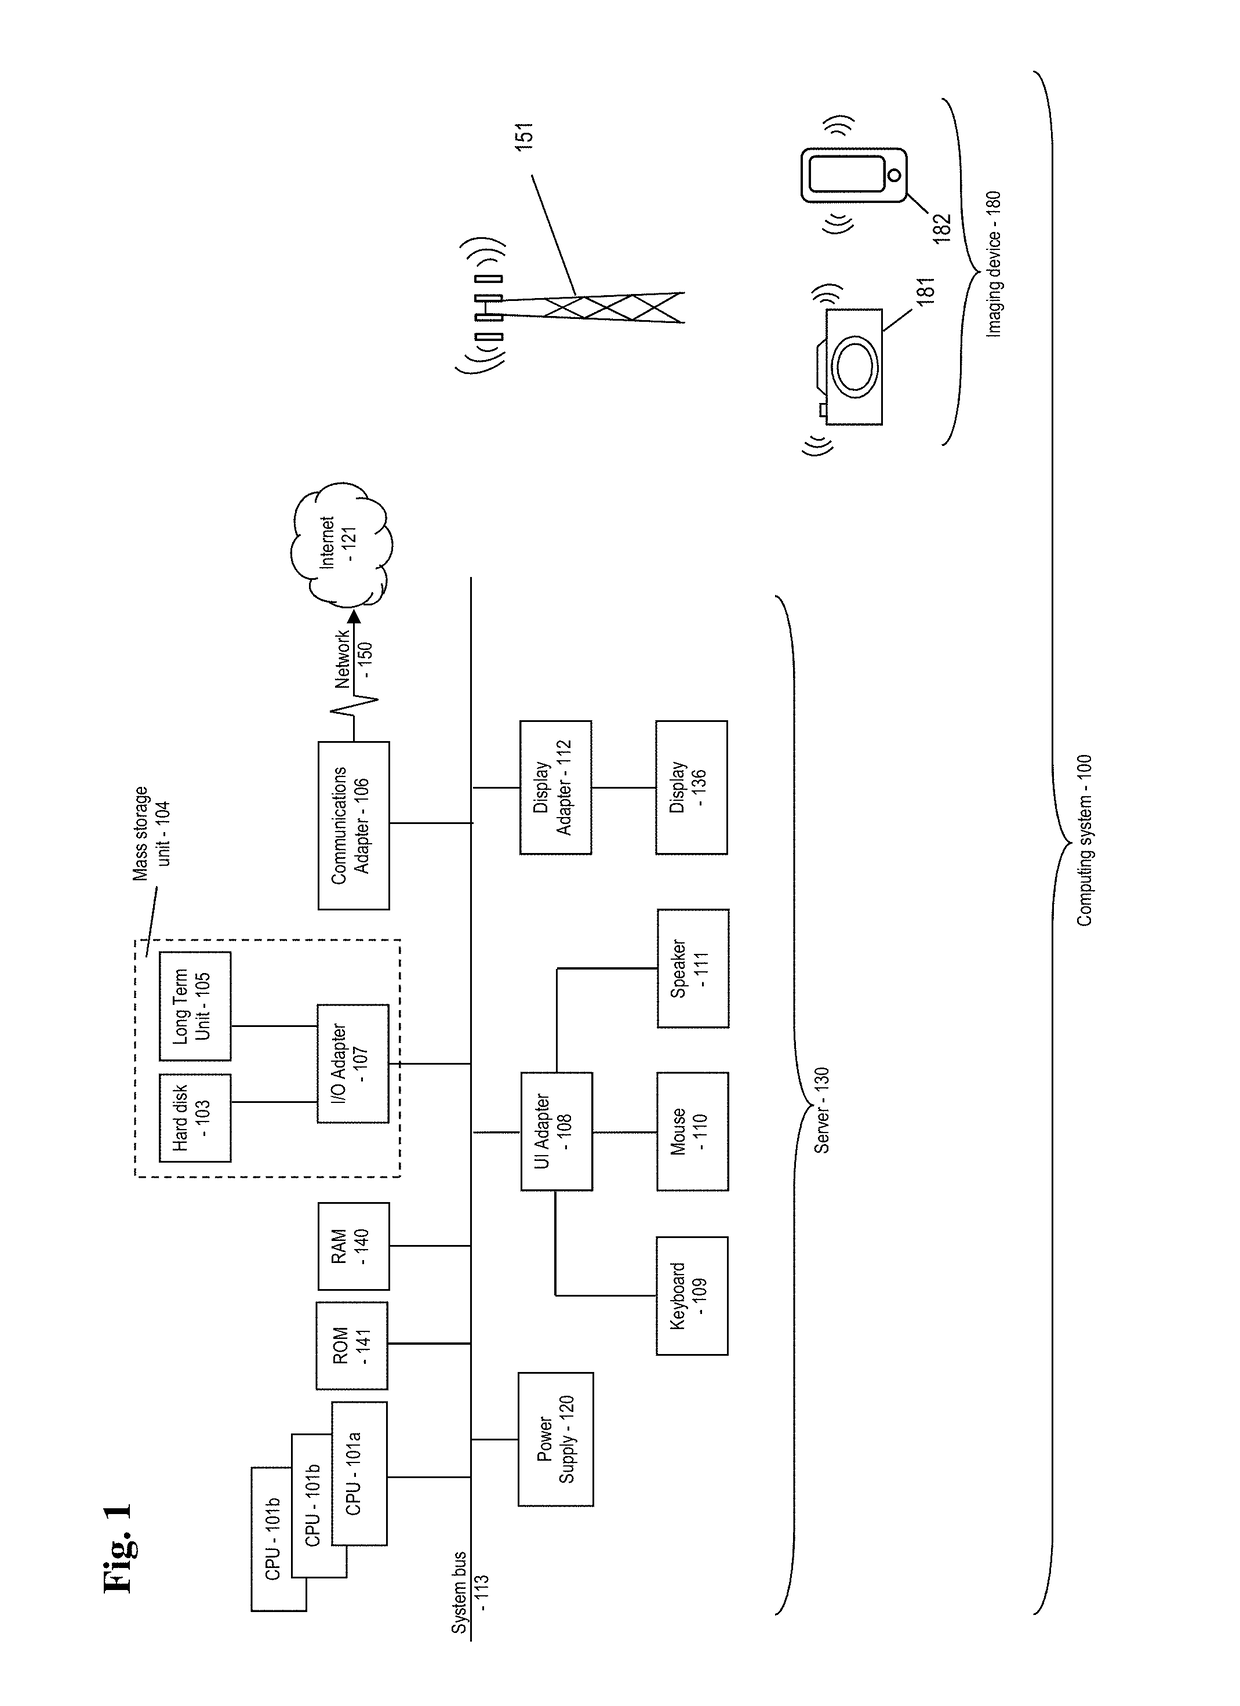 Method and apparatus of neural network based image signal processor